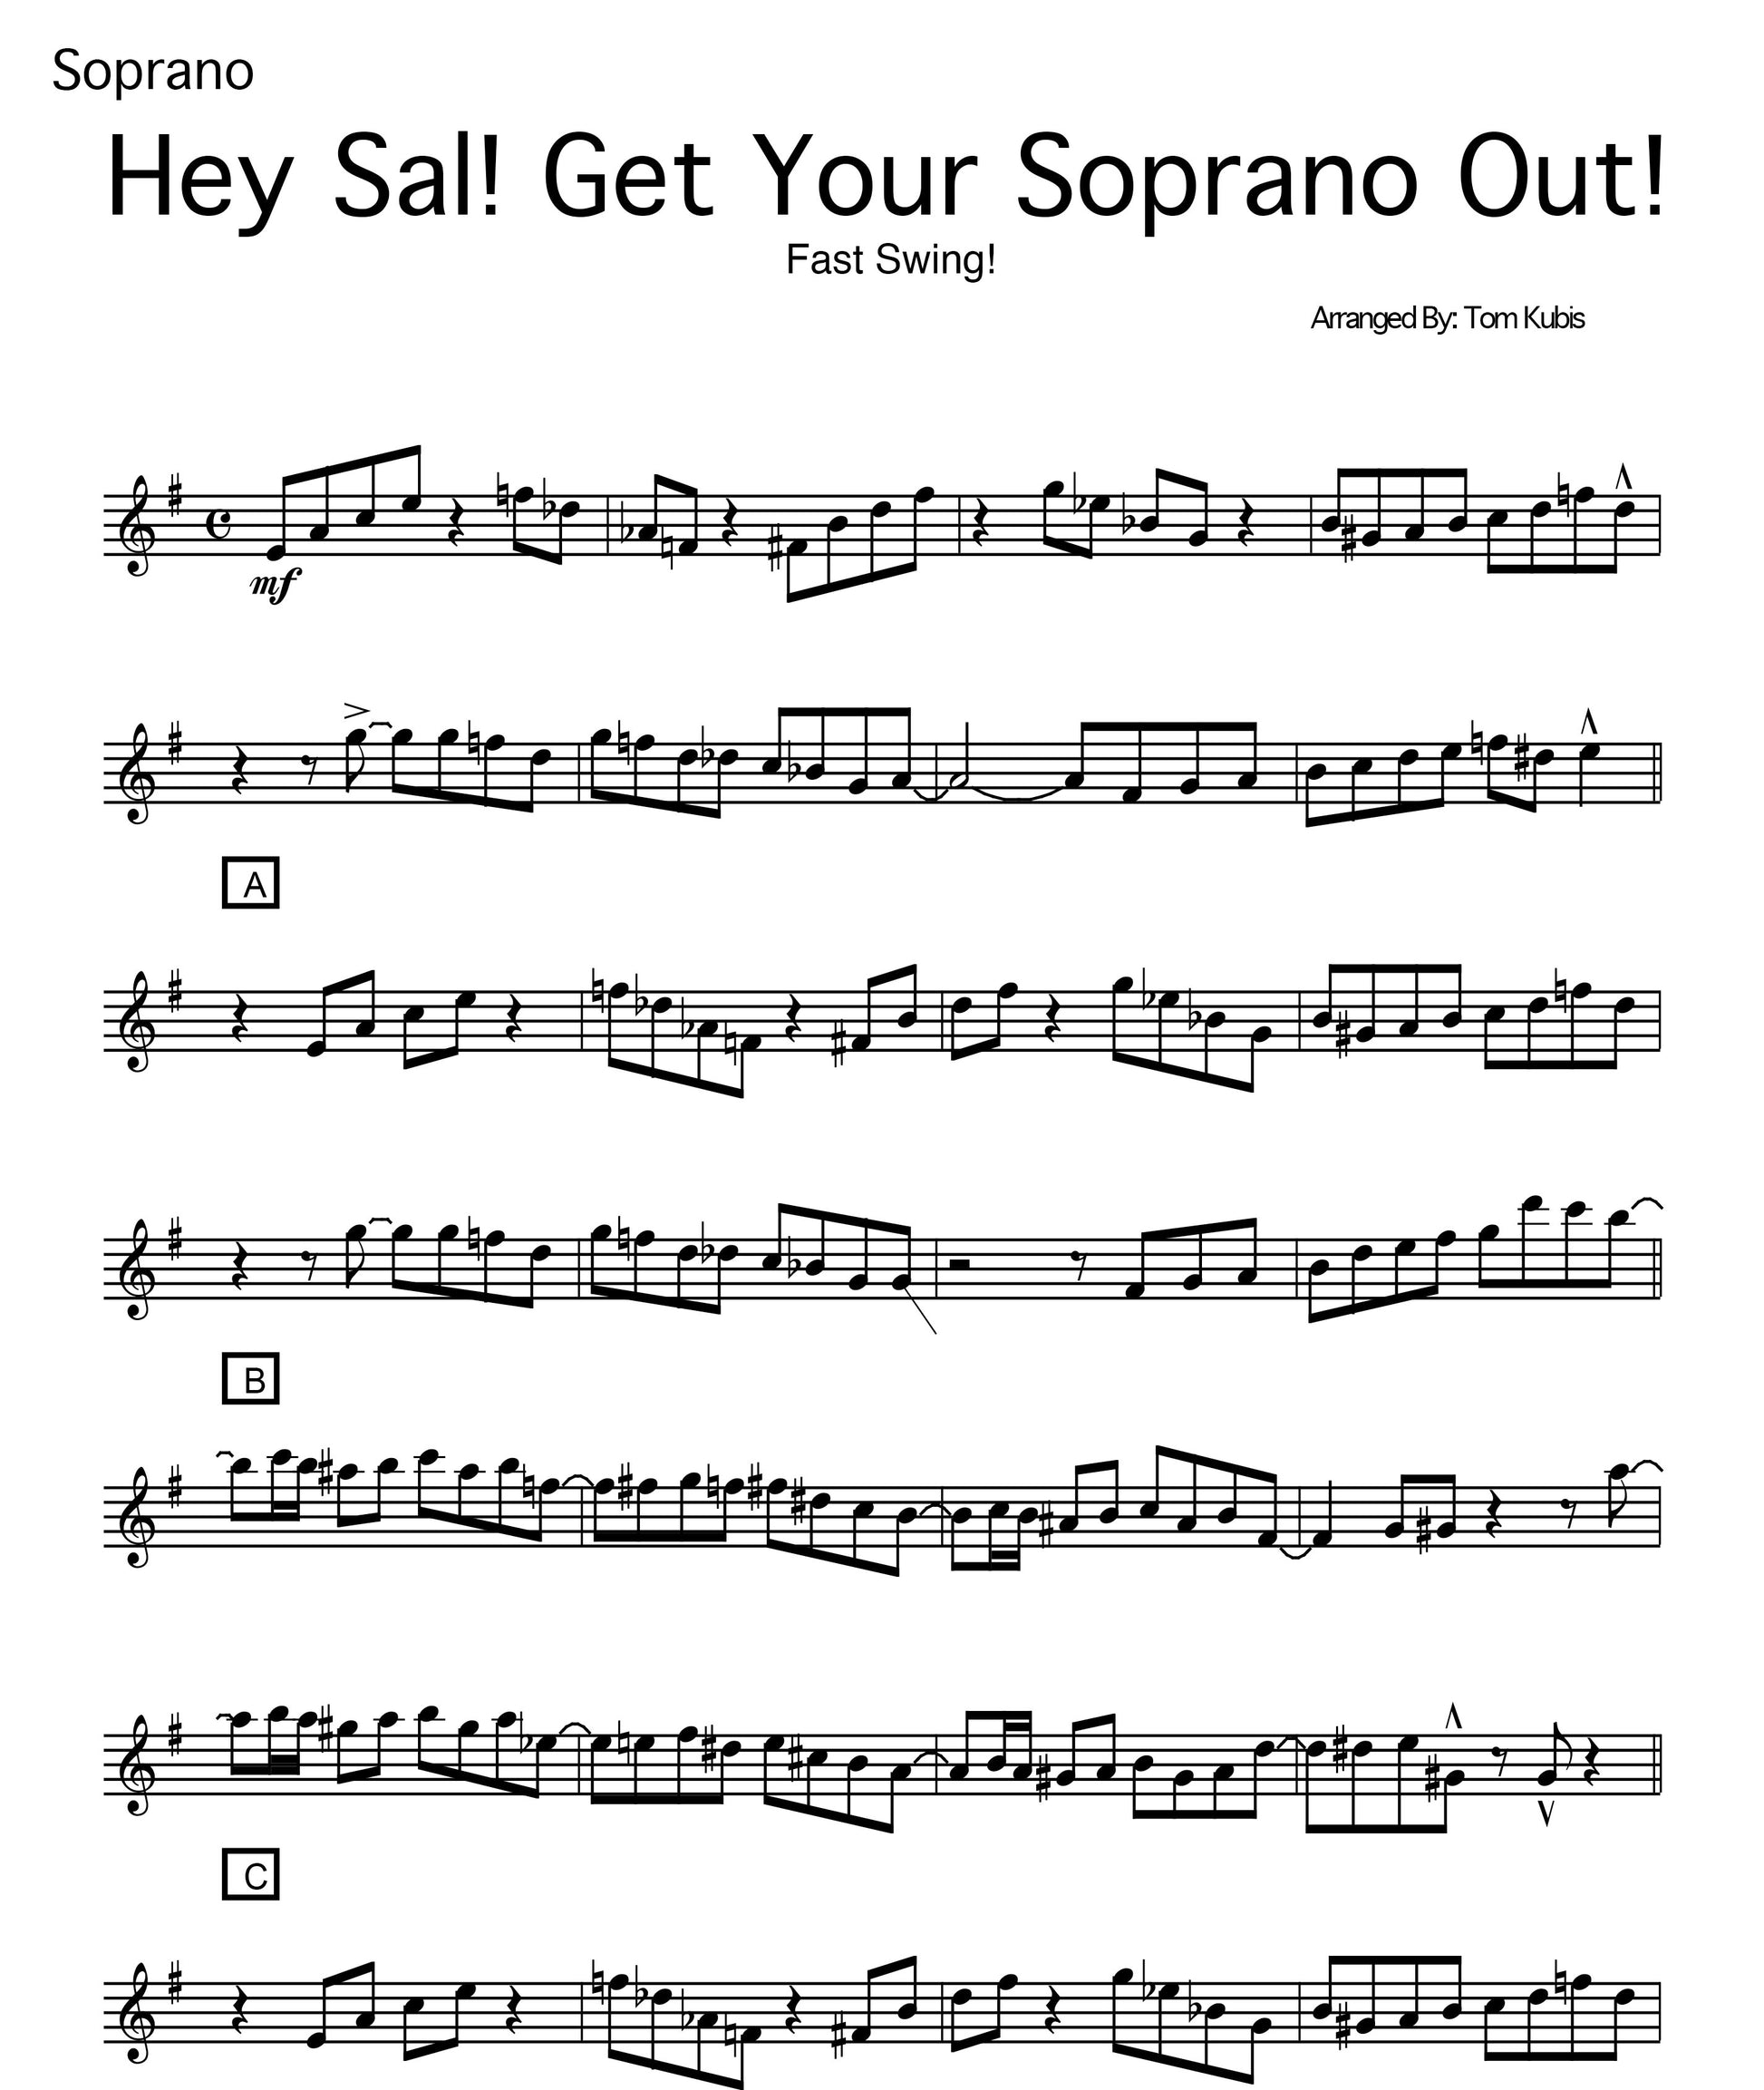 Hey Sal Get Your Soprano Out!